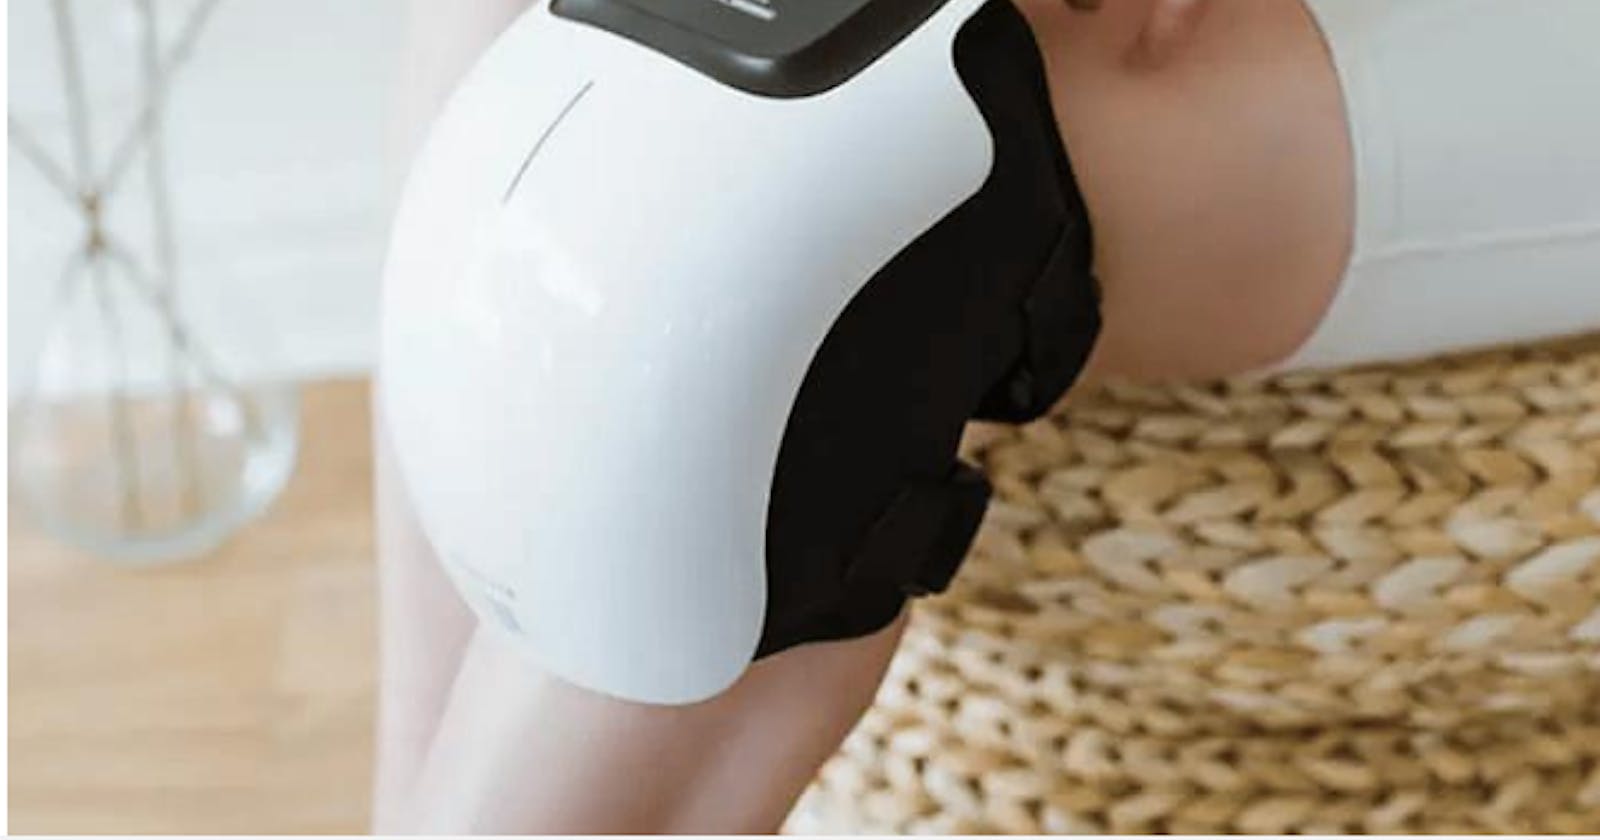 Nooro Knee Massager (Latest Update) - You Have To Read This!